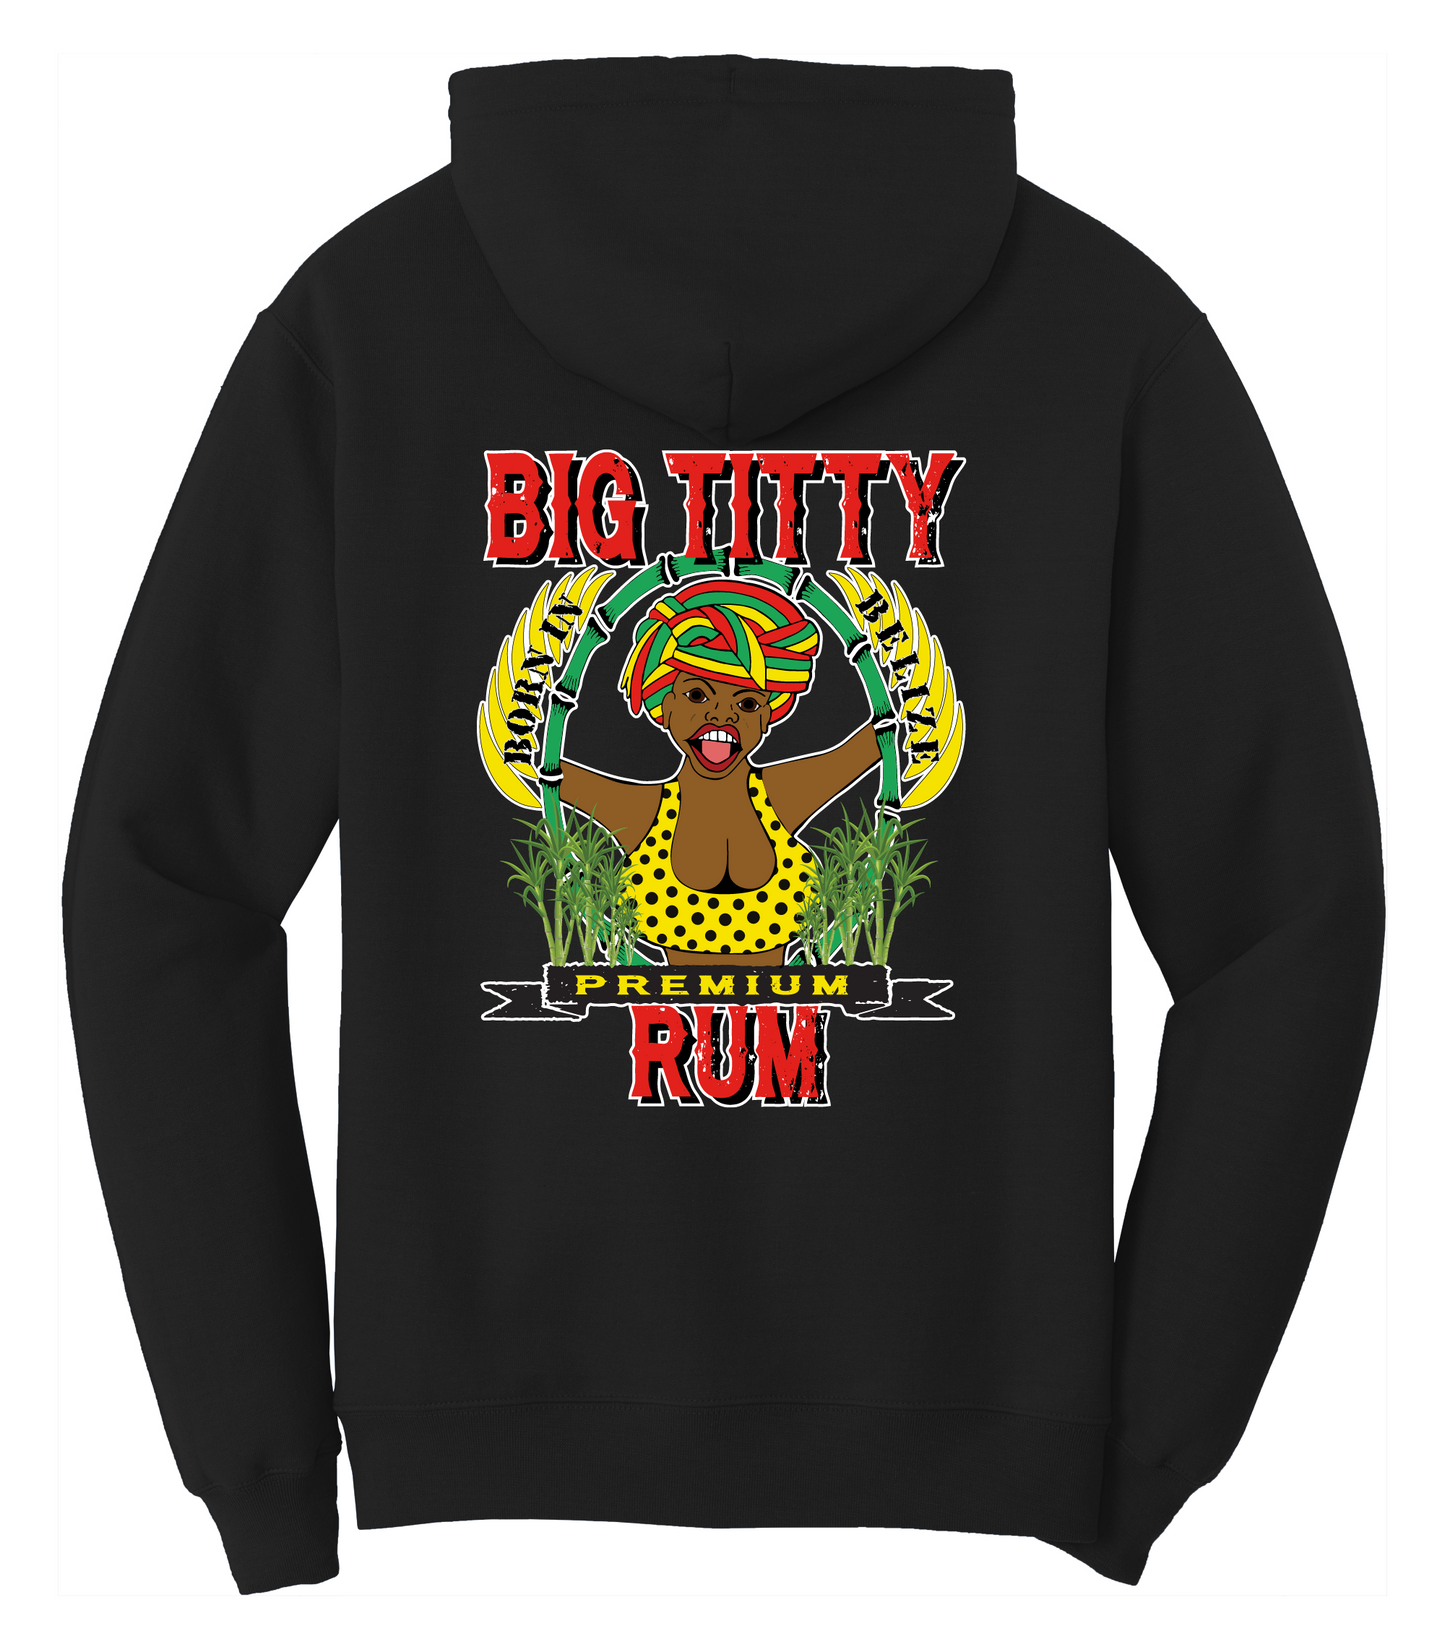 Big Titty Rum Hoodie logo on front and back